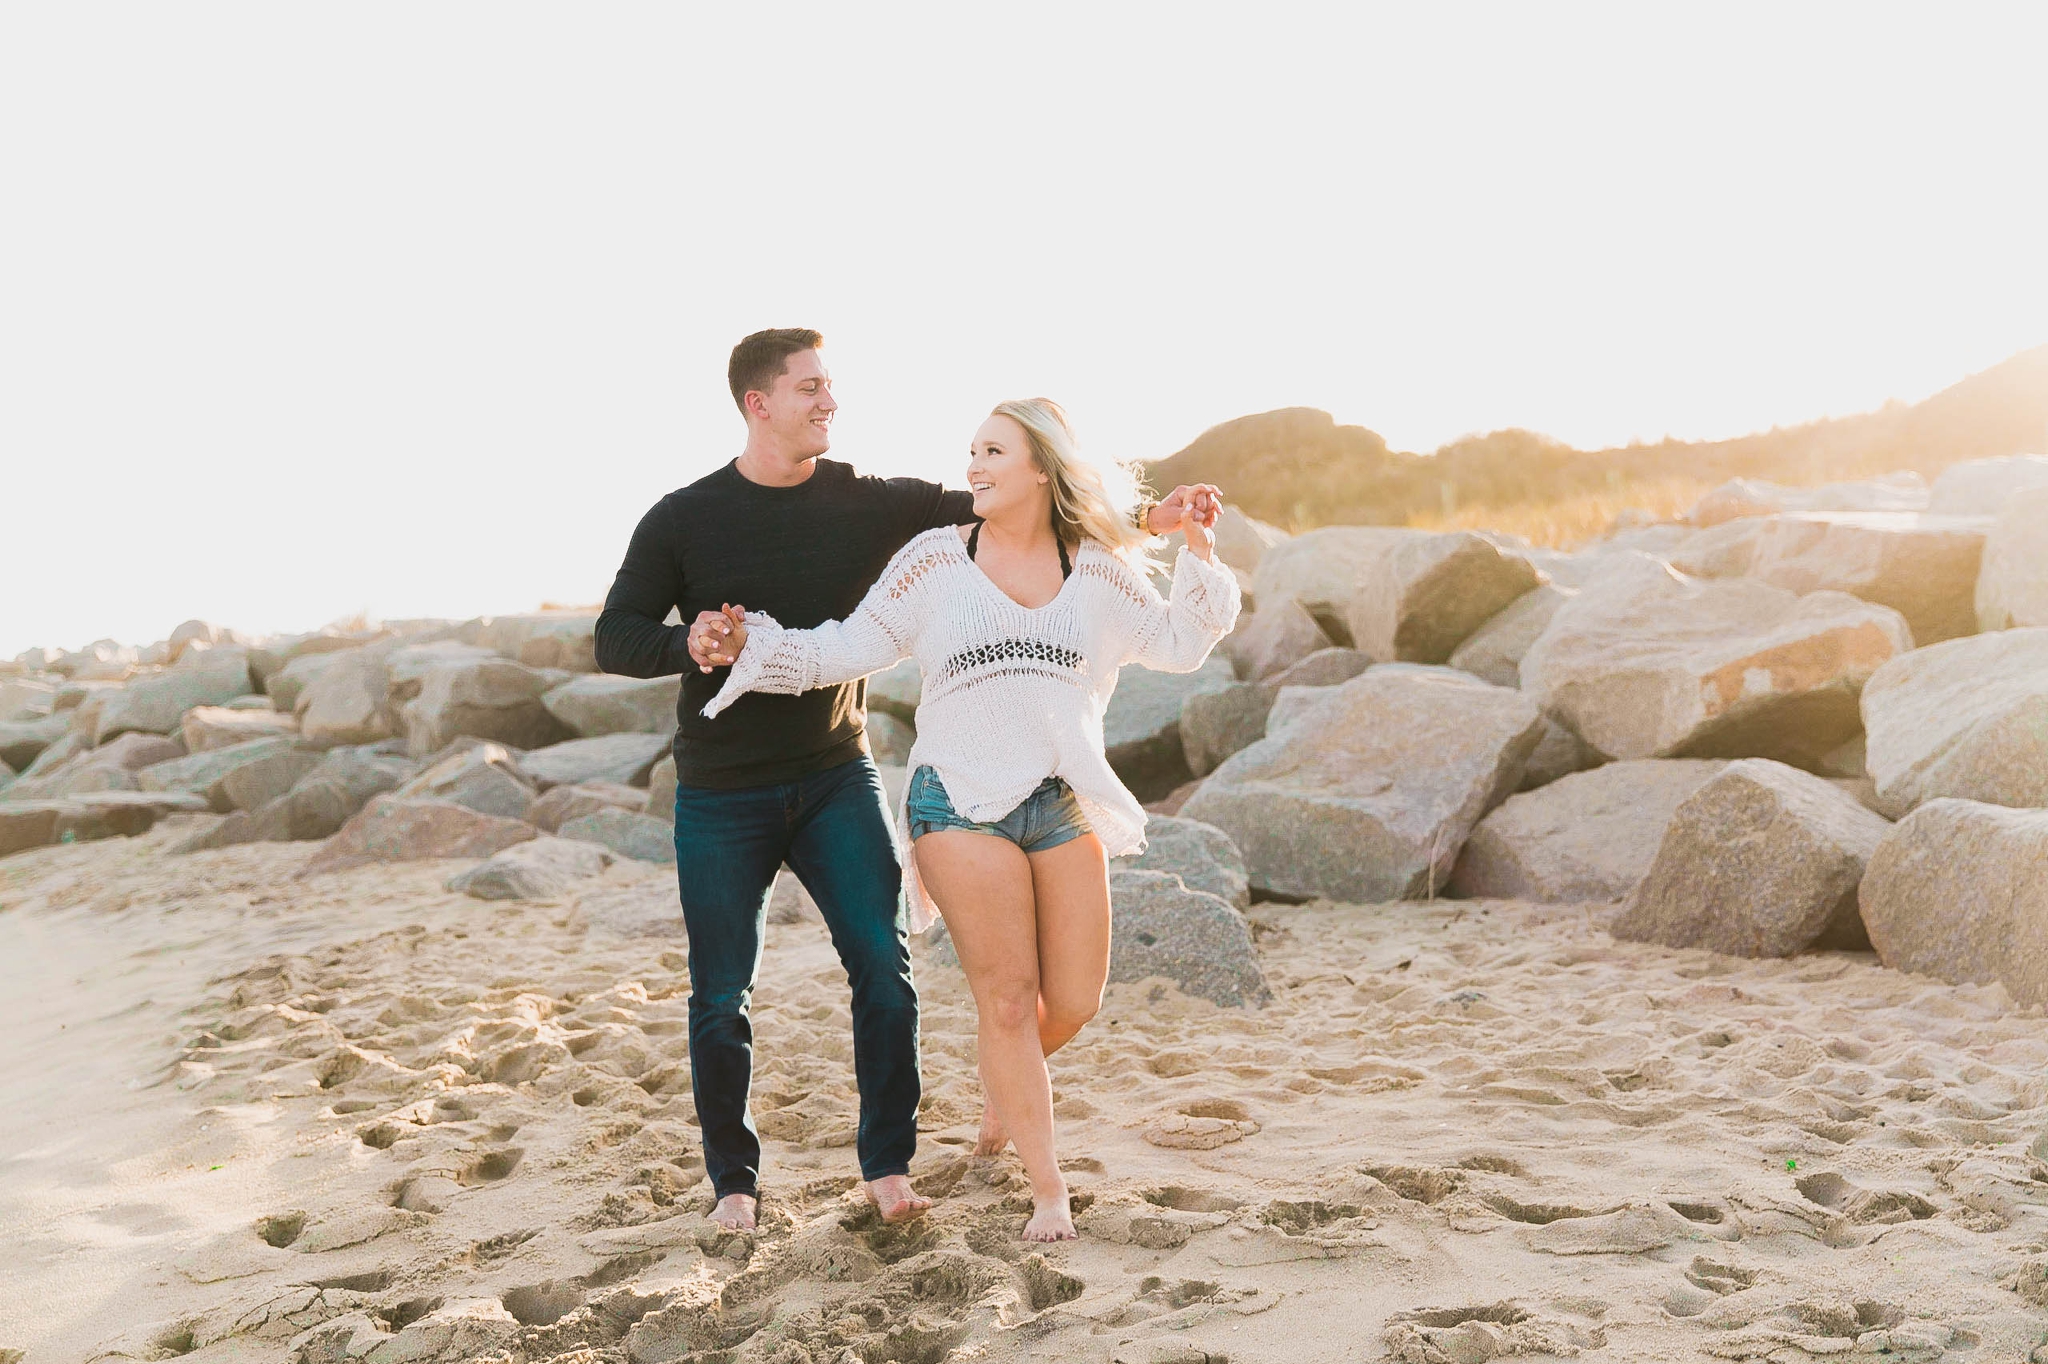  couple being playful at the beach and doing the titanic flying pose at sunset during golden hour light - girl wearing ripped jeans shorts and a white free people sweater - Casual Beach Engagement Photography Session - Honolulu Oahu Hawaii Wedding Ph